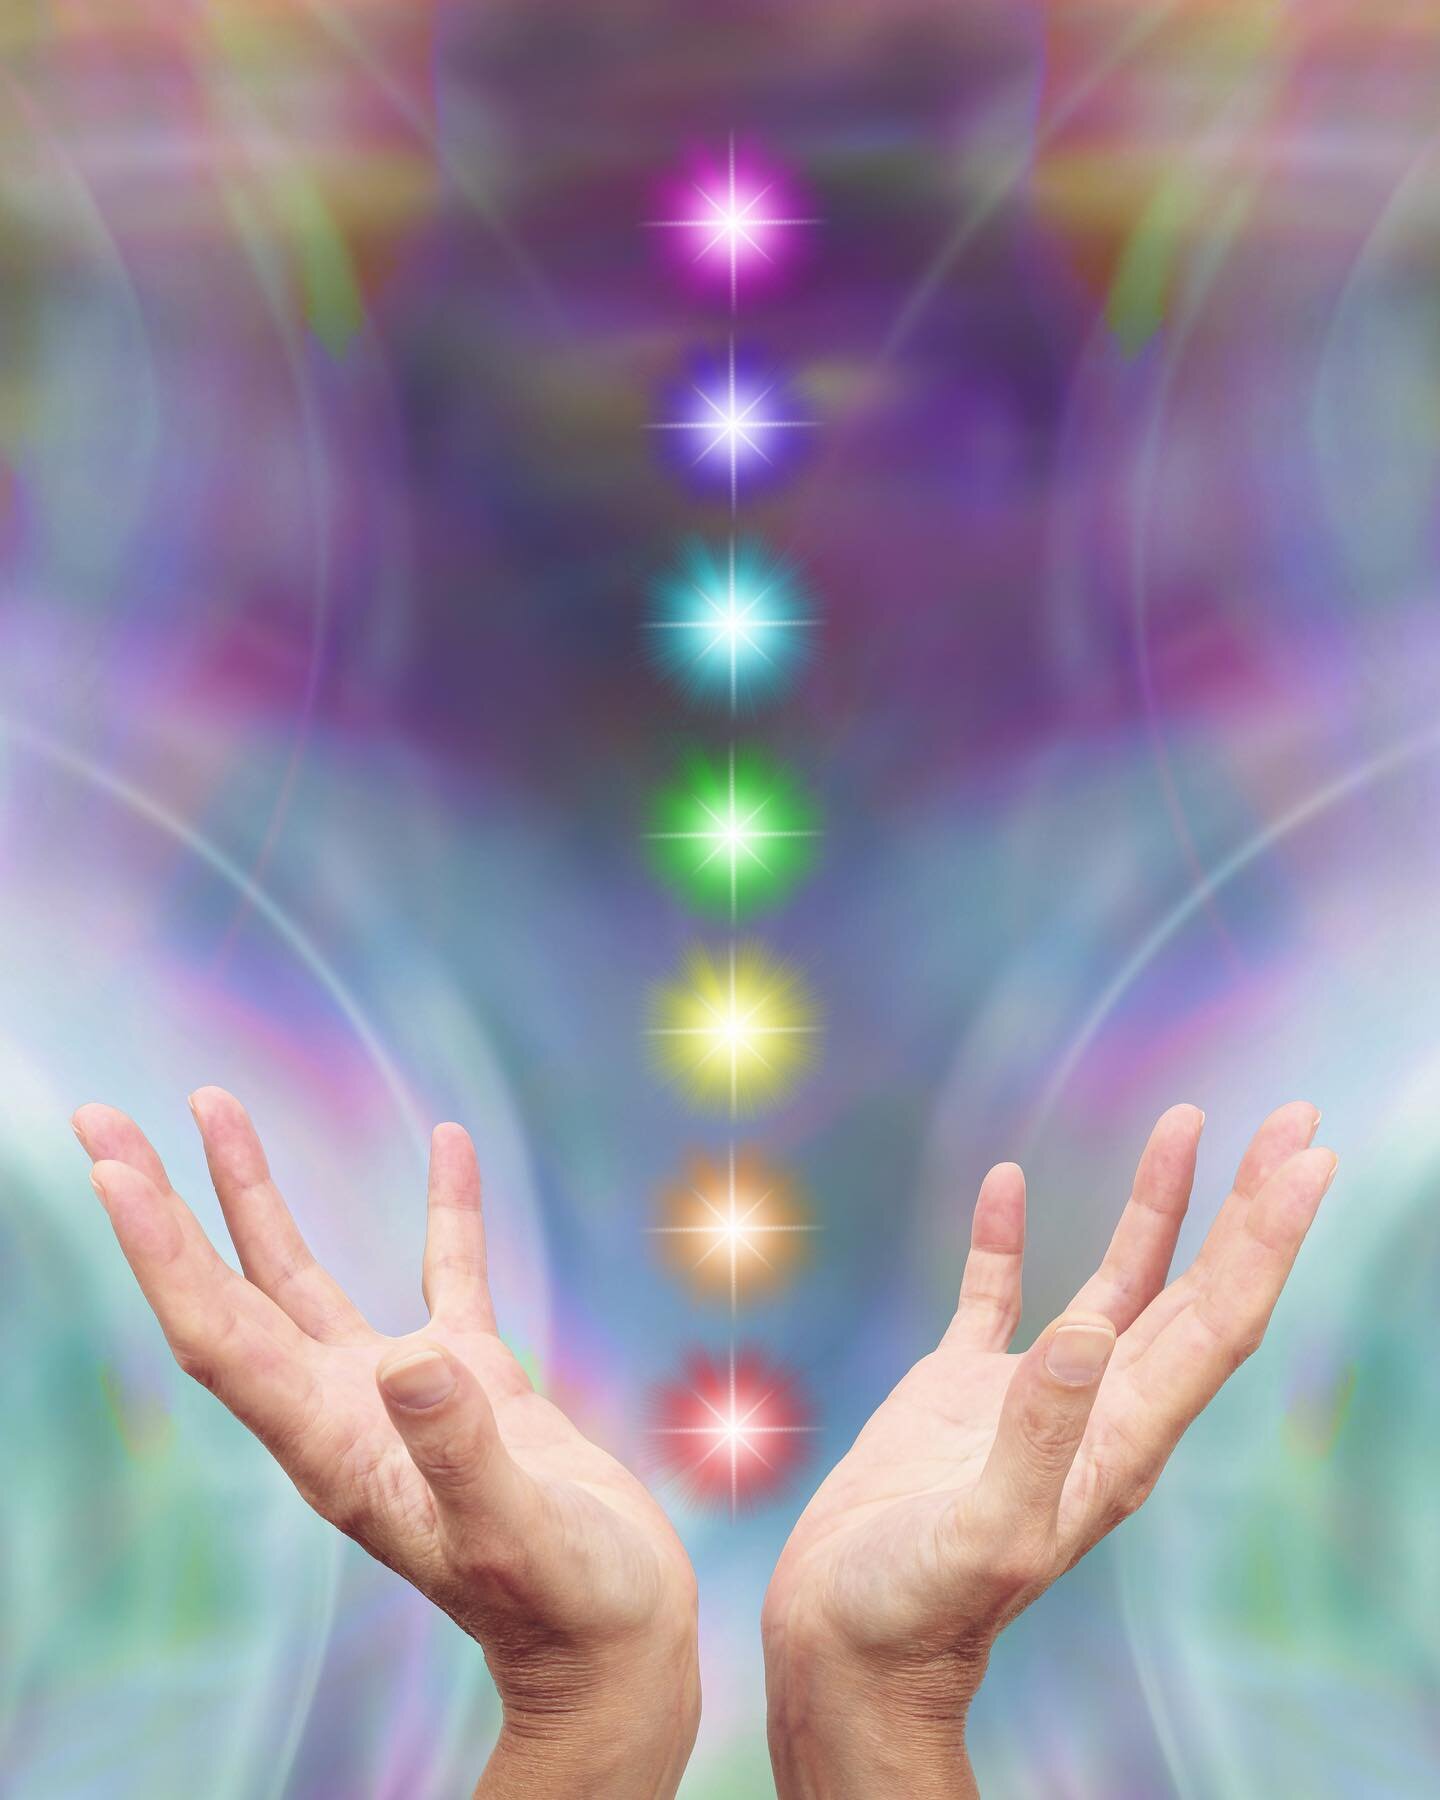 You&rsquo;ve most likely heard about chakras and the role they play in the flow of energy in your body. You may have also heard that it&rsquo;s important to keep your chakras open, or unblocked. But what exactly are chakras and how do they affect you